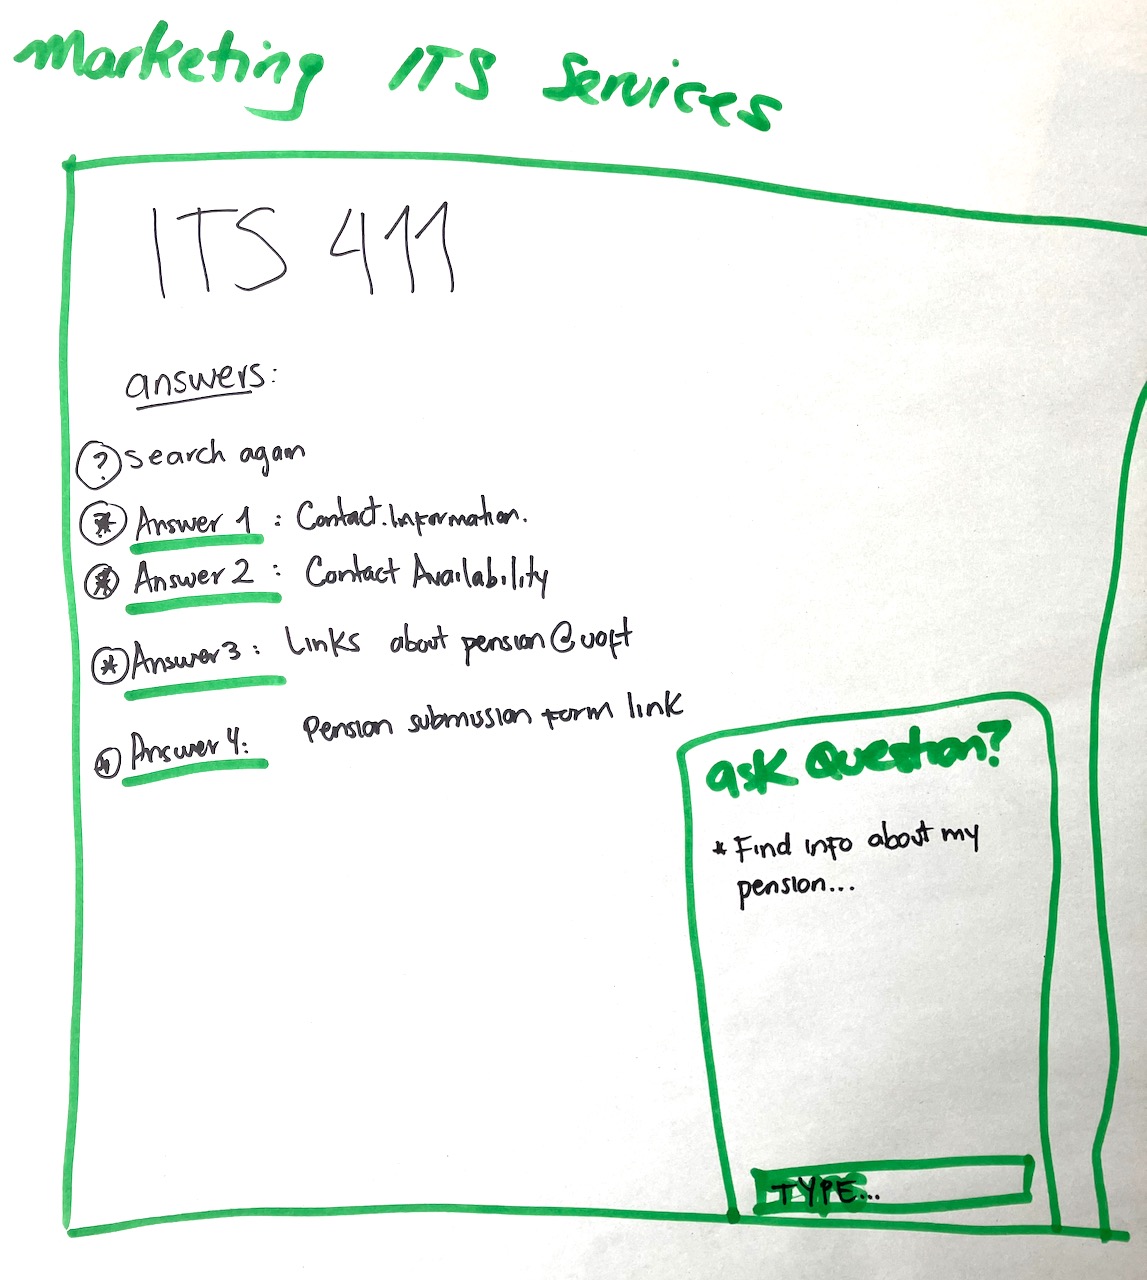 Interface mockup drawn on chart paper with marker. This tool is labeled "ITS 411"